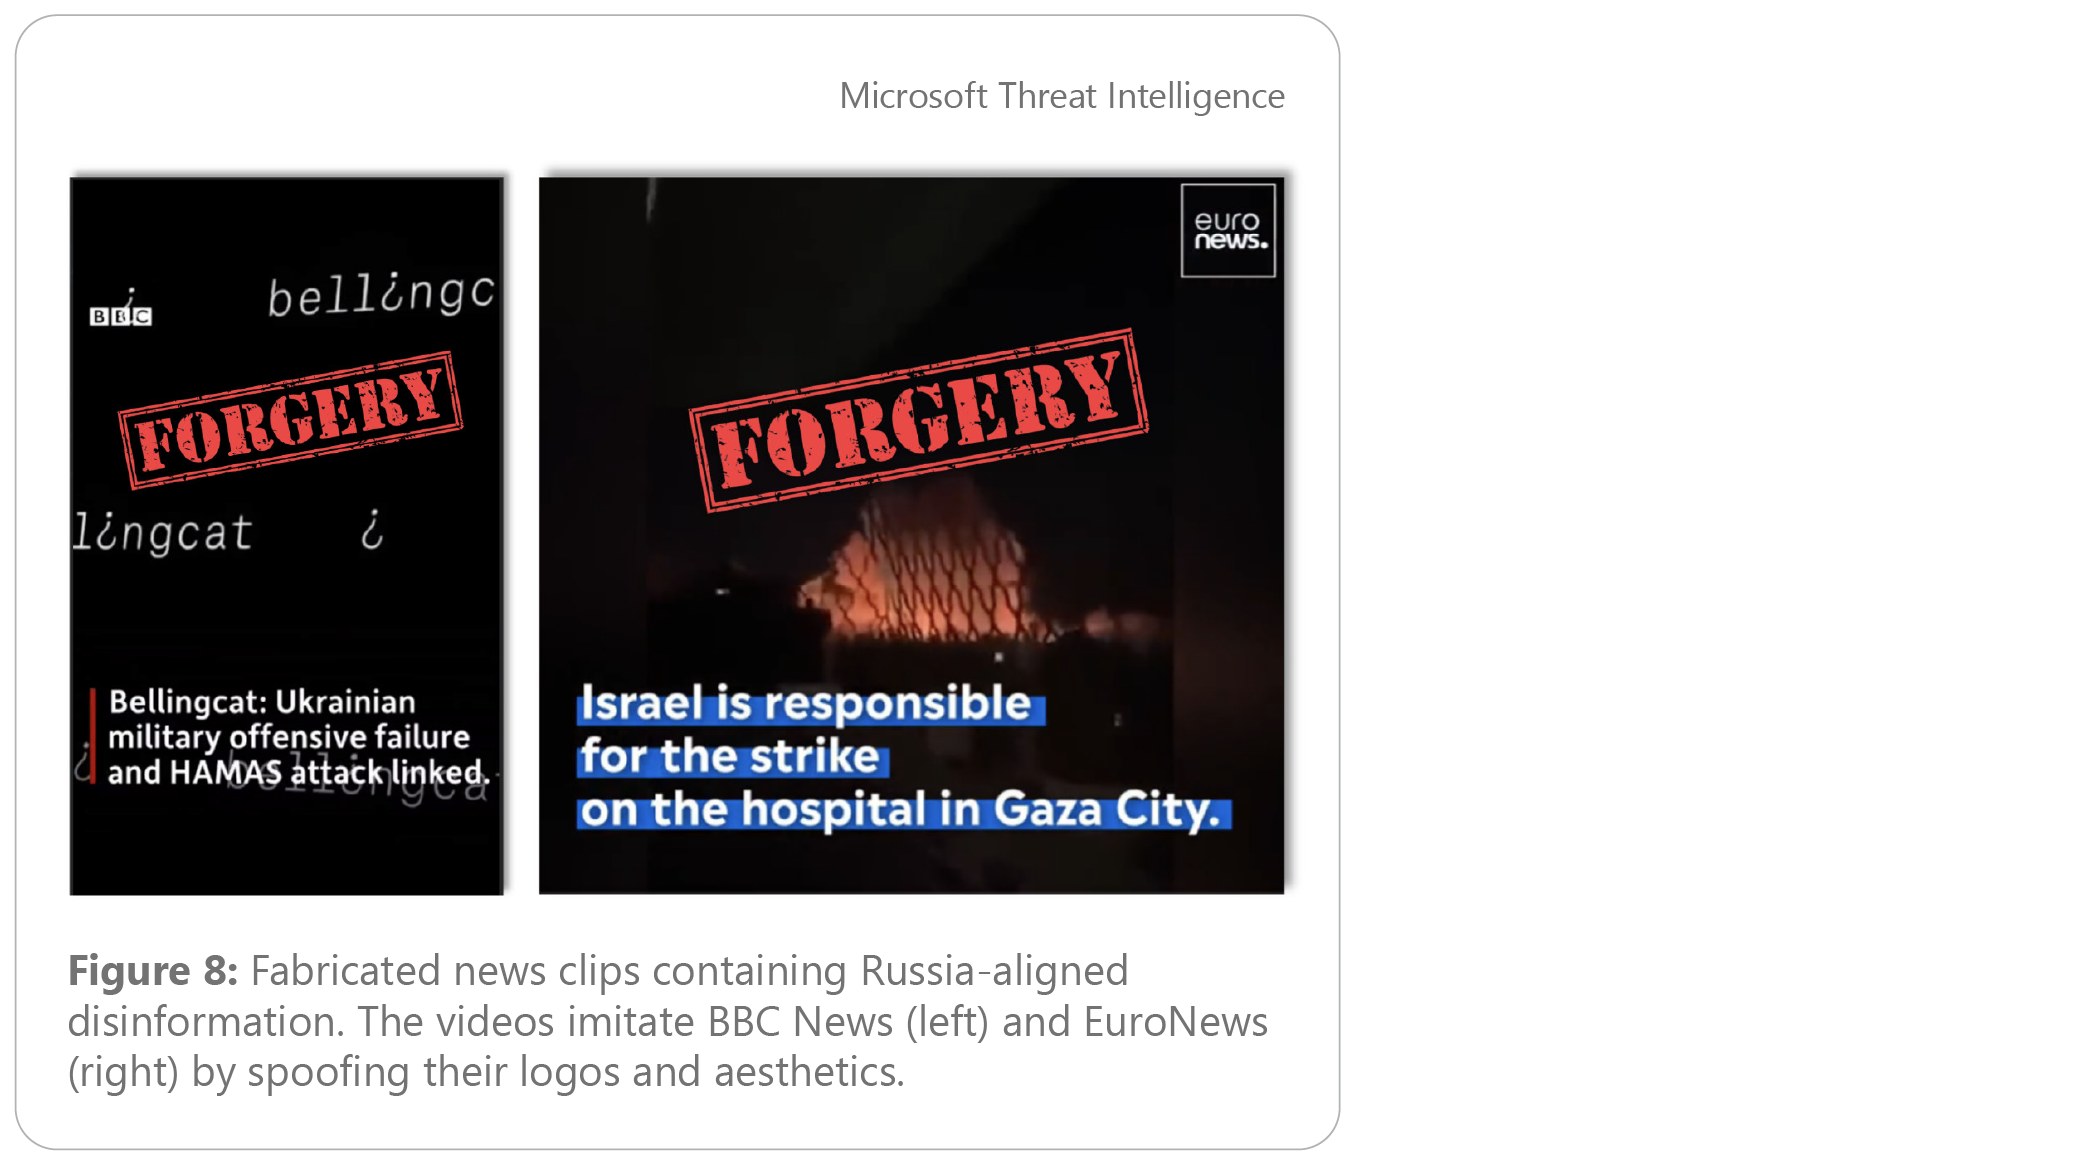 Two still images from fabricated news clips containing Russia-aligned disinformation